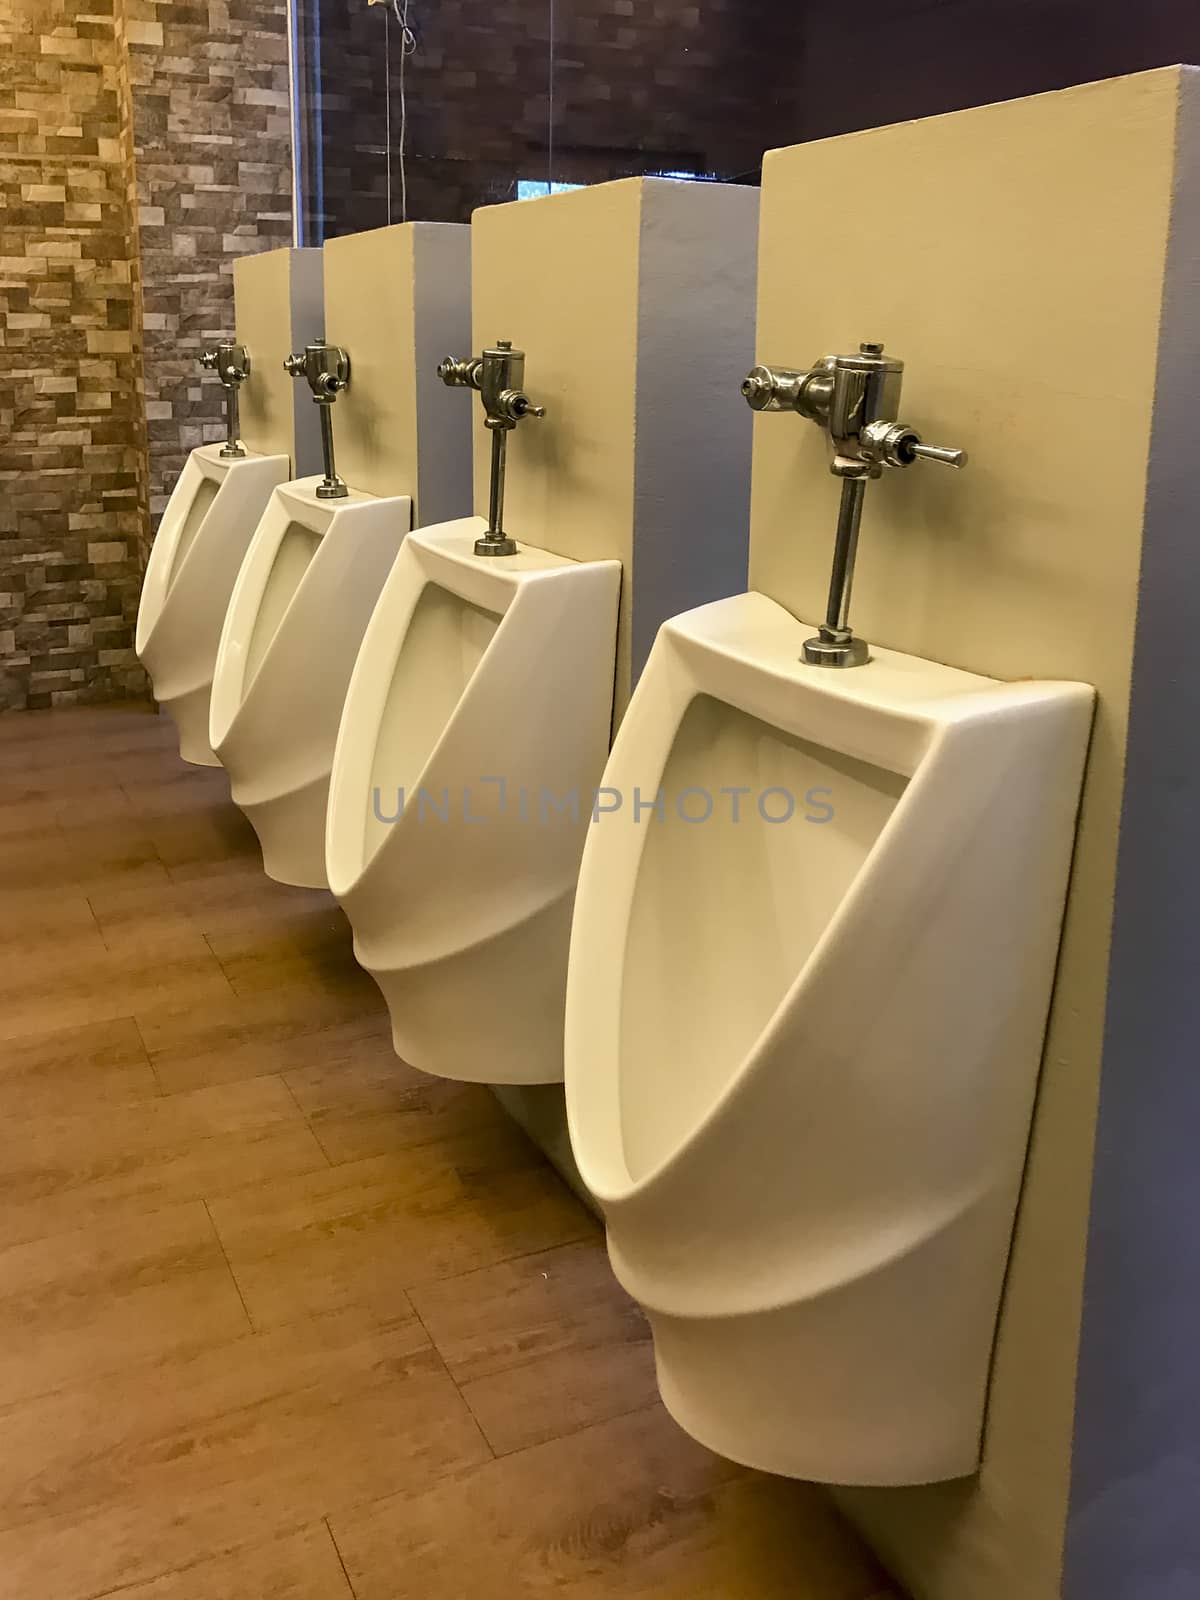 White men's urinals lined in a toilet by TakerWalker